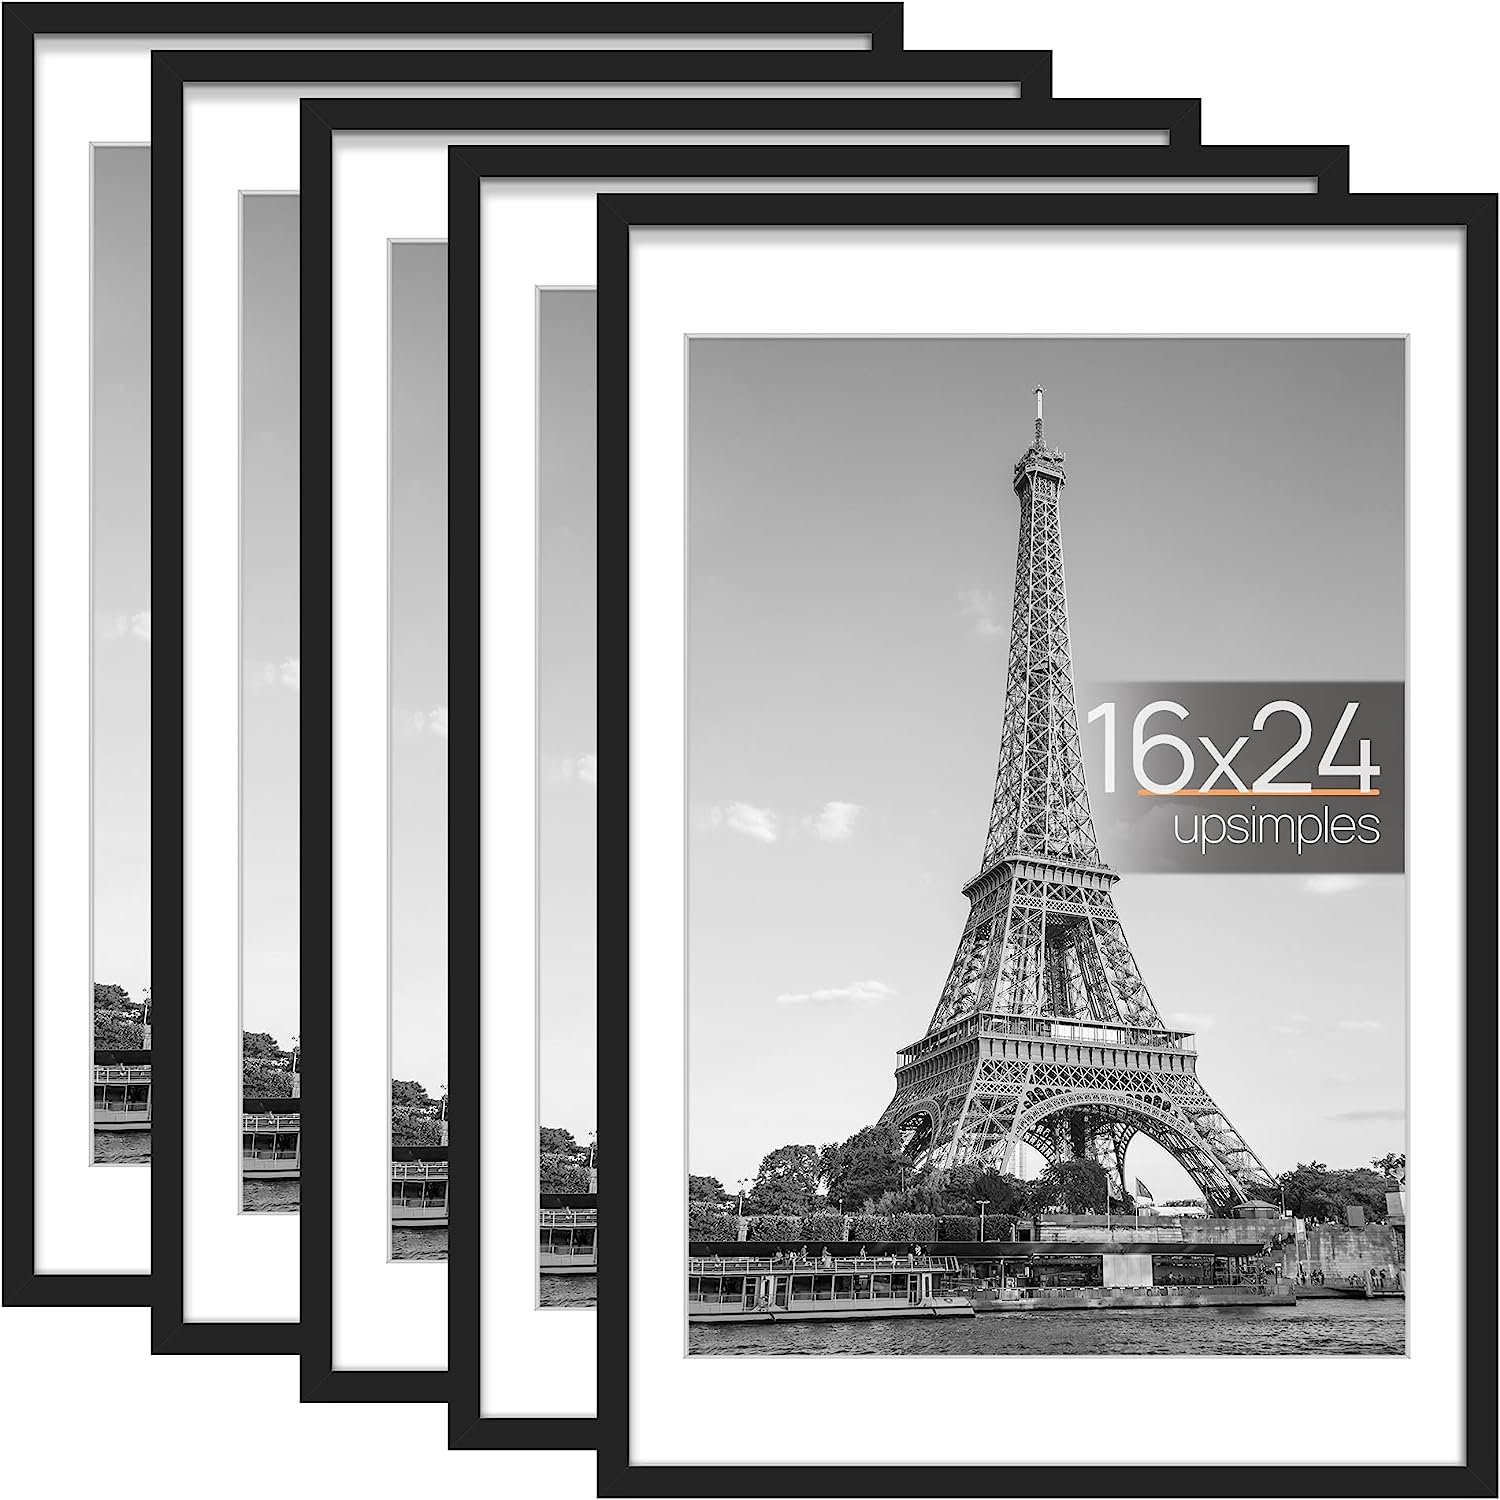 Sindcom 16x24 Poster Frame 3 Pack, Blue Wall Decor Picture Frames with –  Upsimples Direct